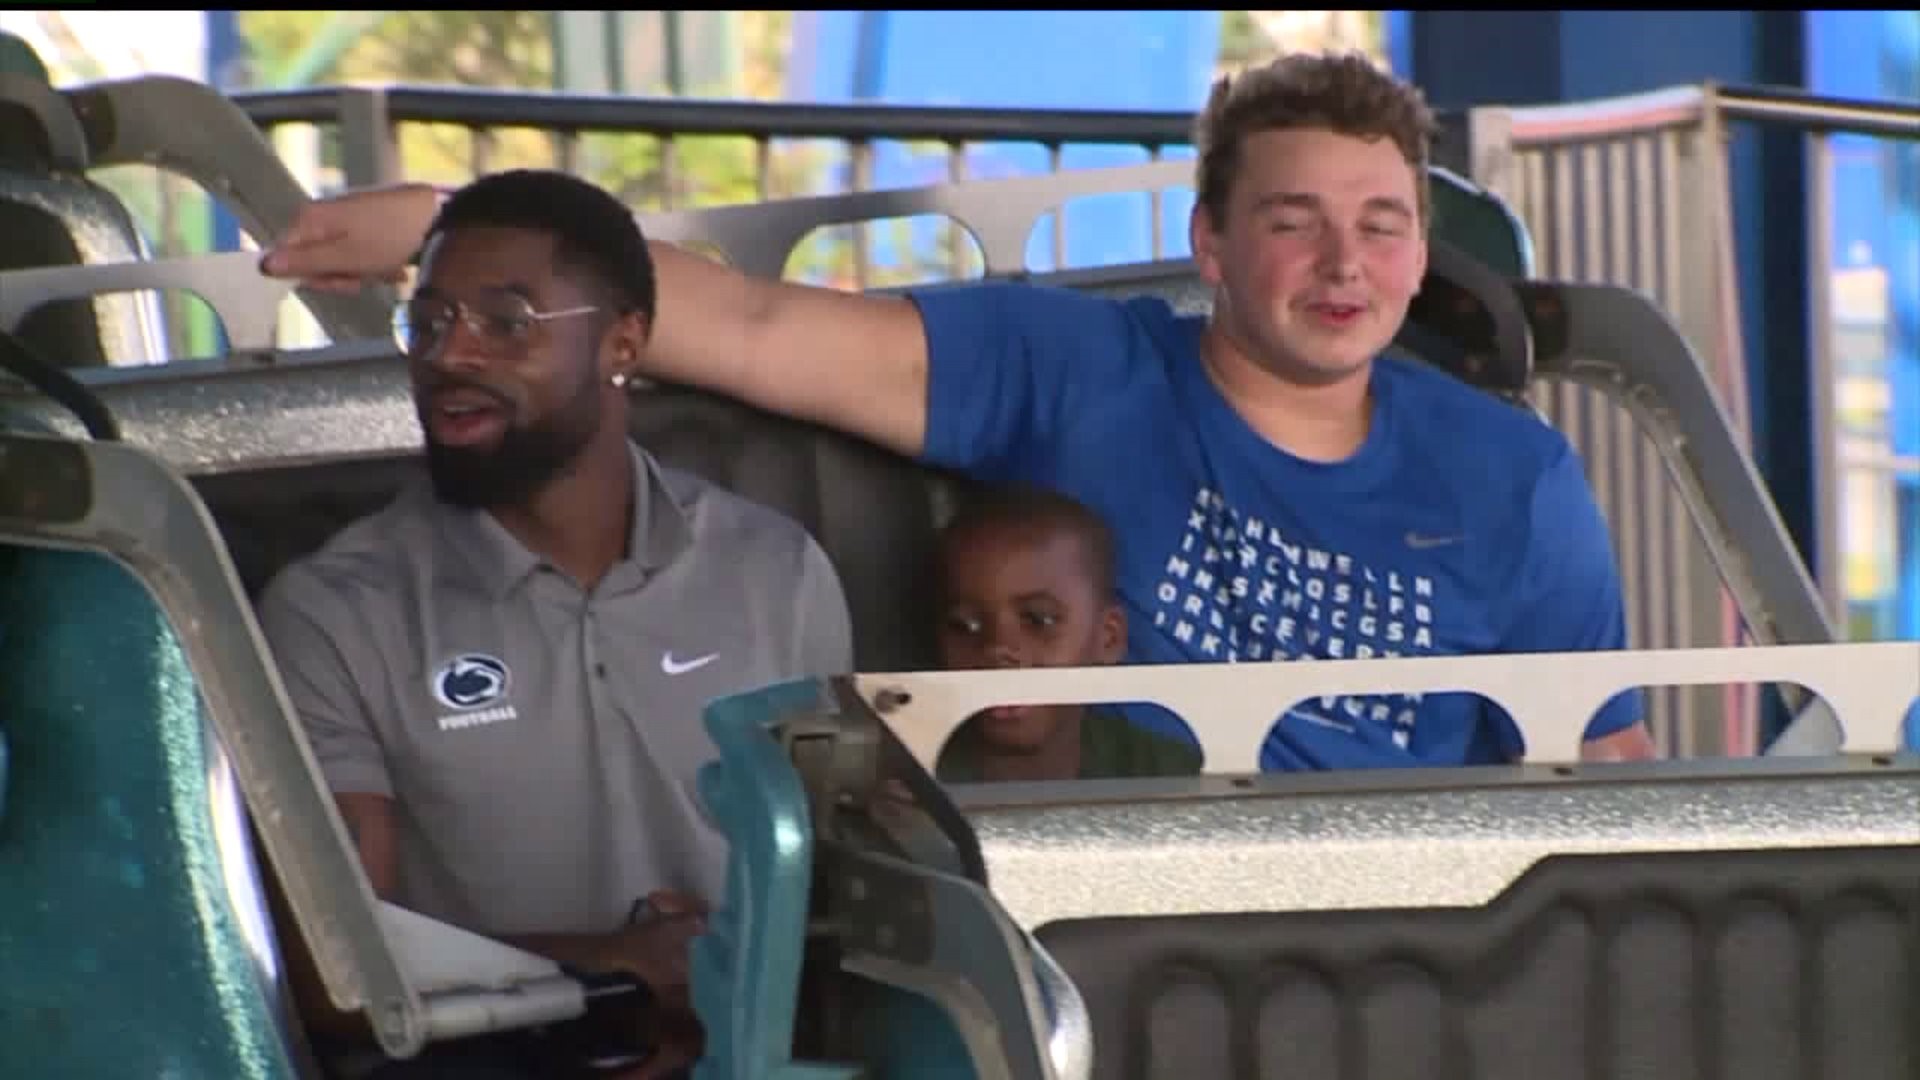 Nittany Lions enjoys a day at Fun Spot America